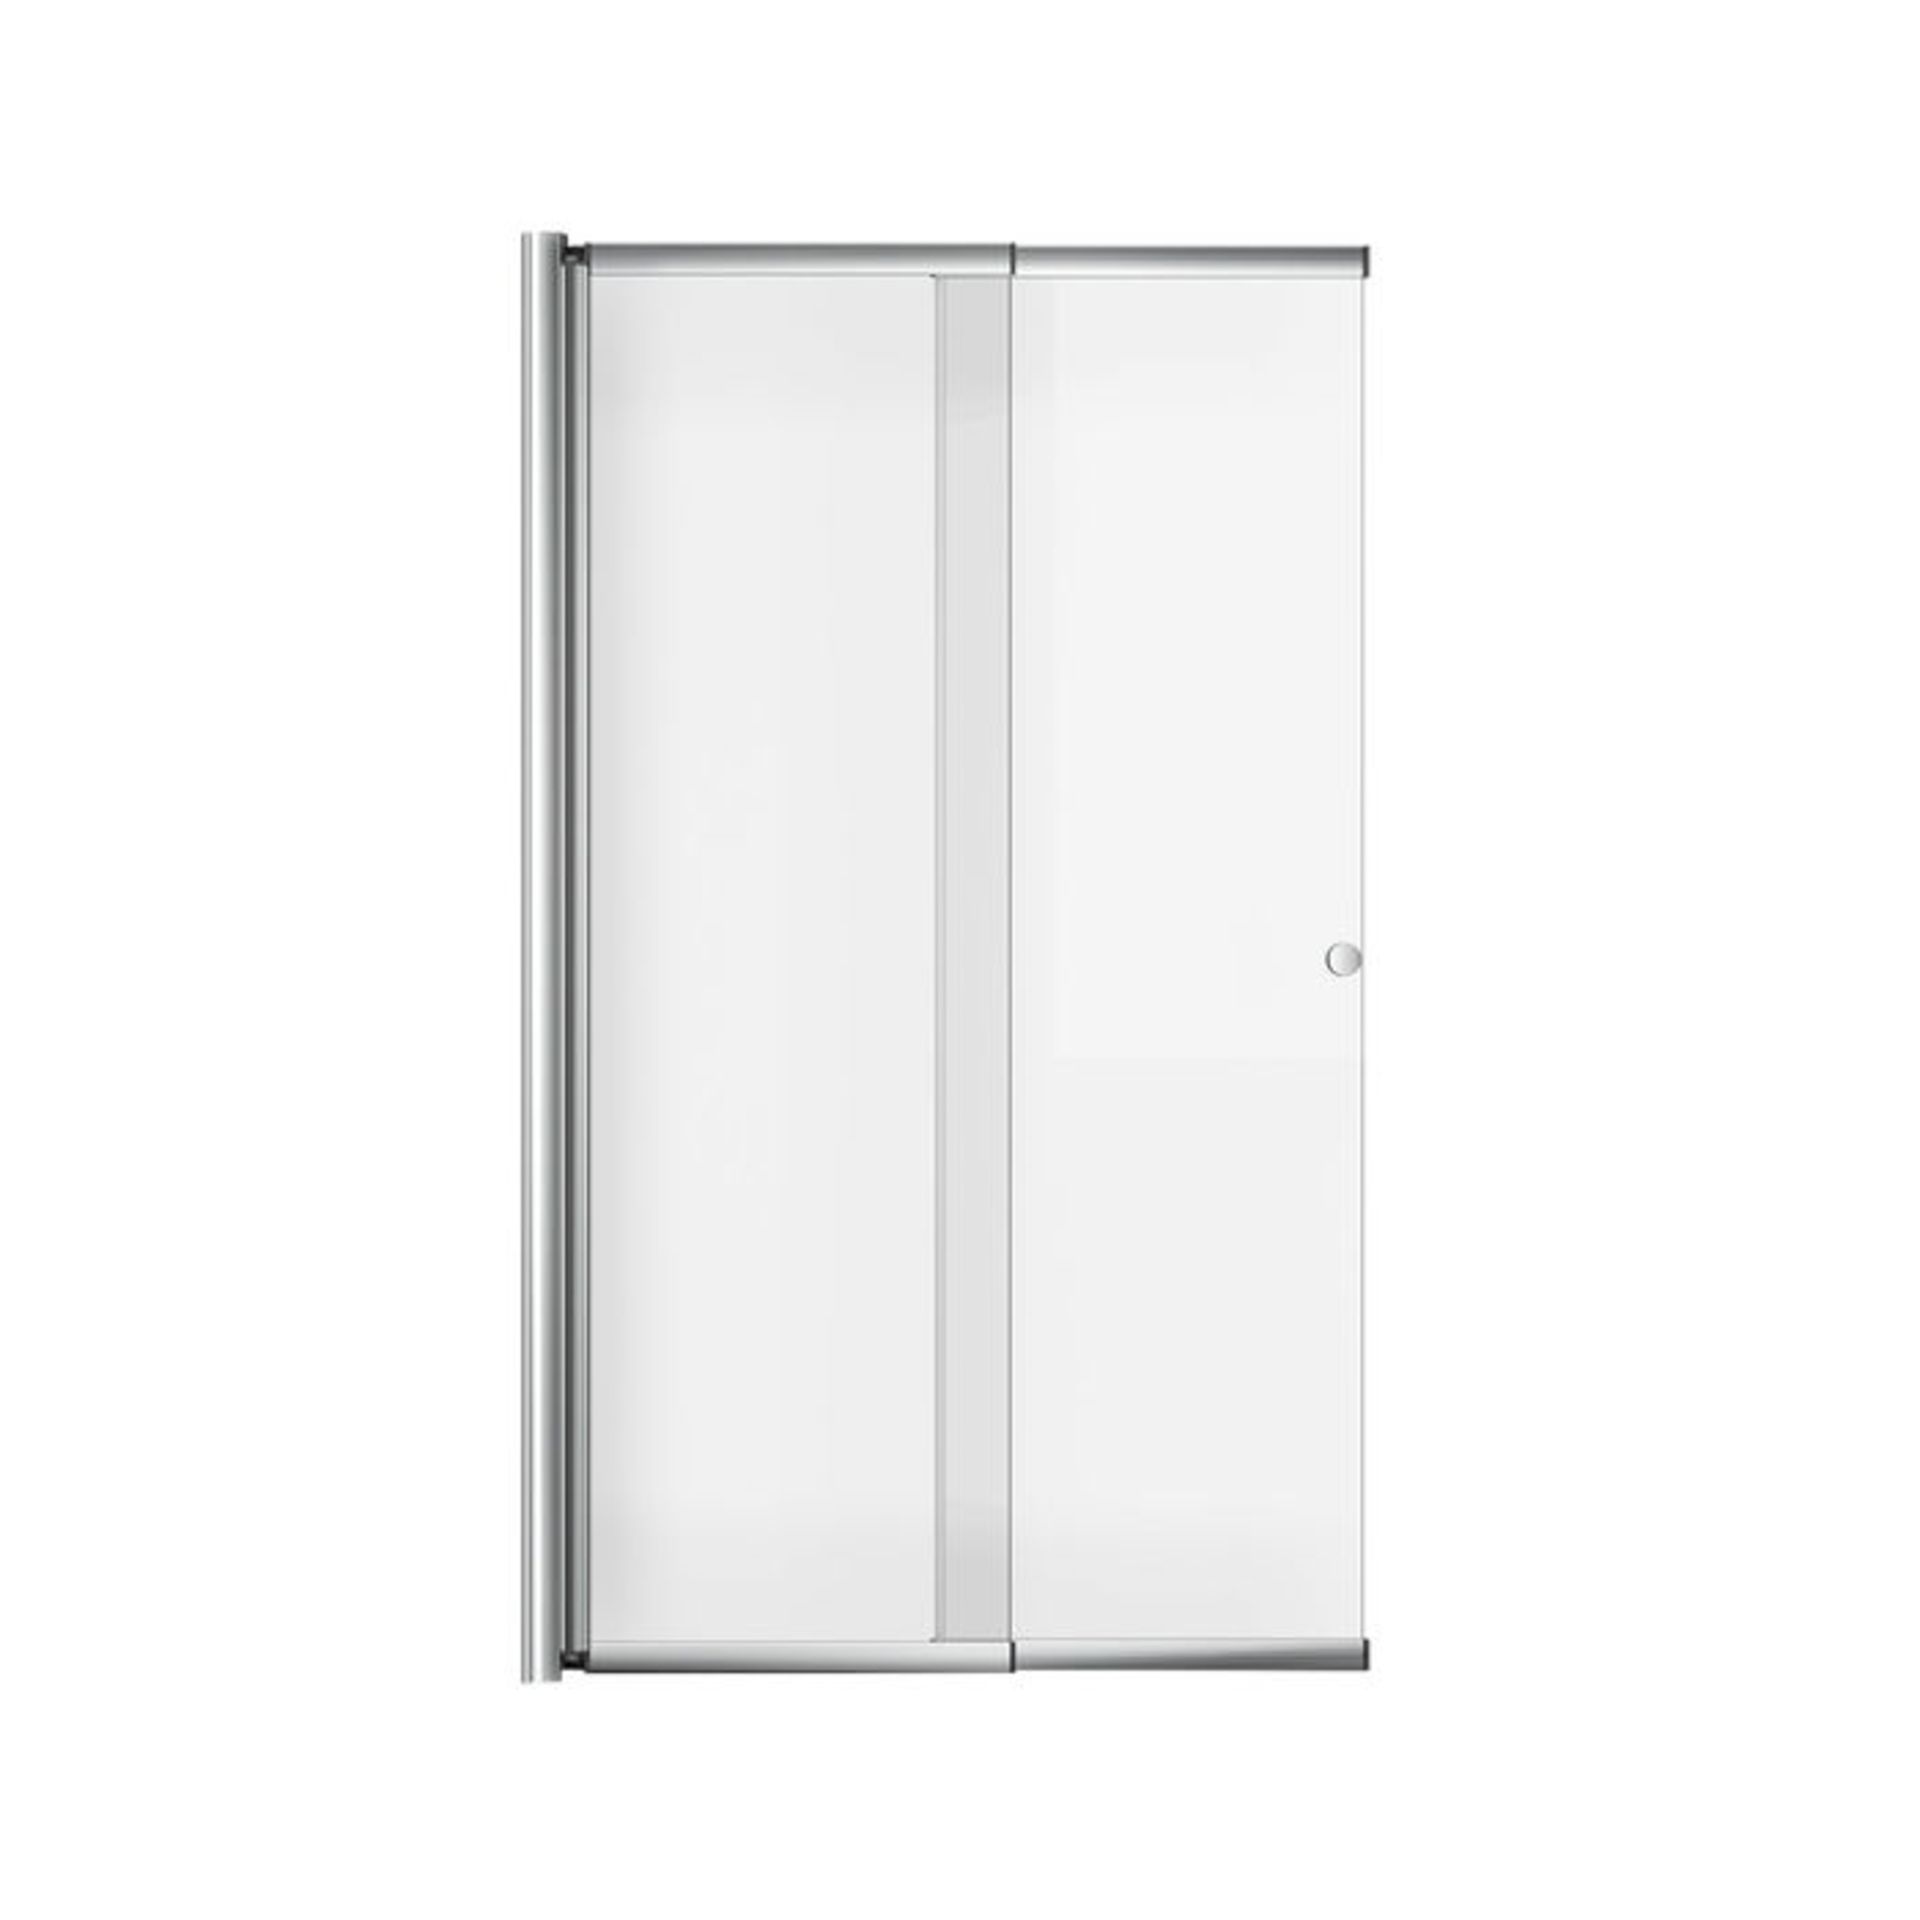 (OS184) 820mm Sliding Bath Screen. RRP £189.00. Constructed of 4mm lightweight tempered safety glass - Image 2 of 2